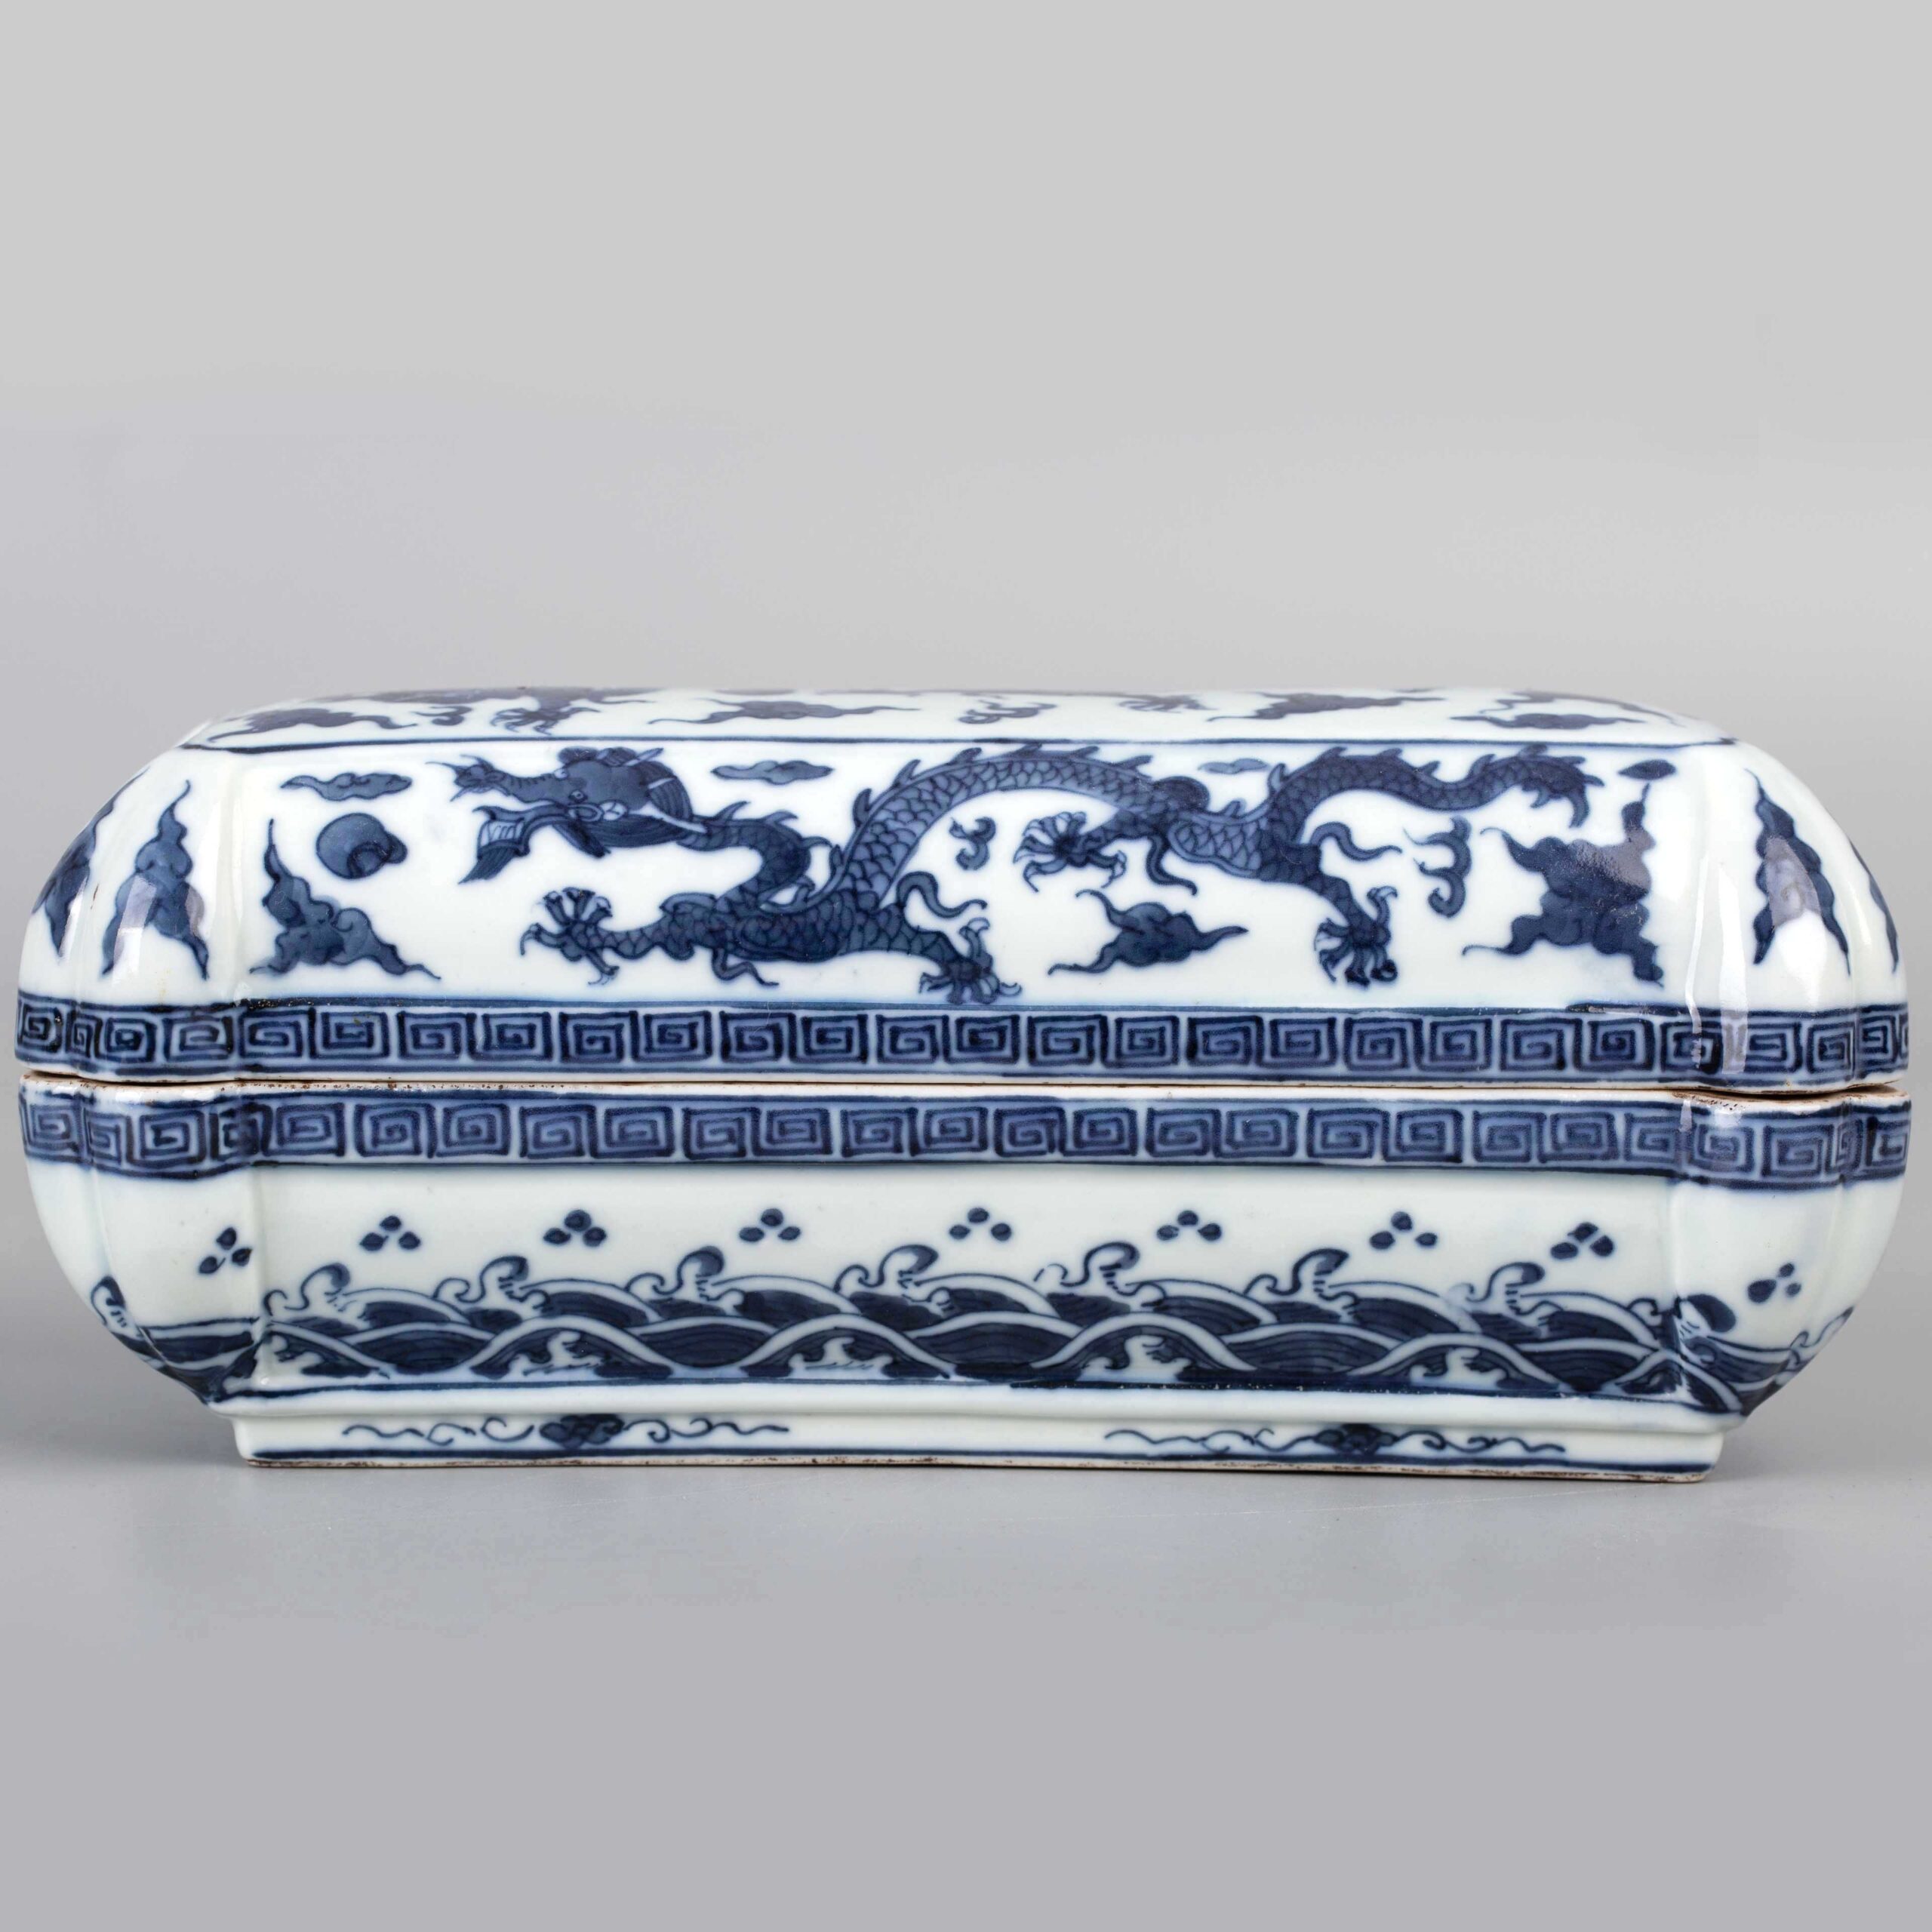 Blue and white dragon pattern lid box with Daming Wanli Year Made 